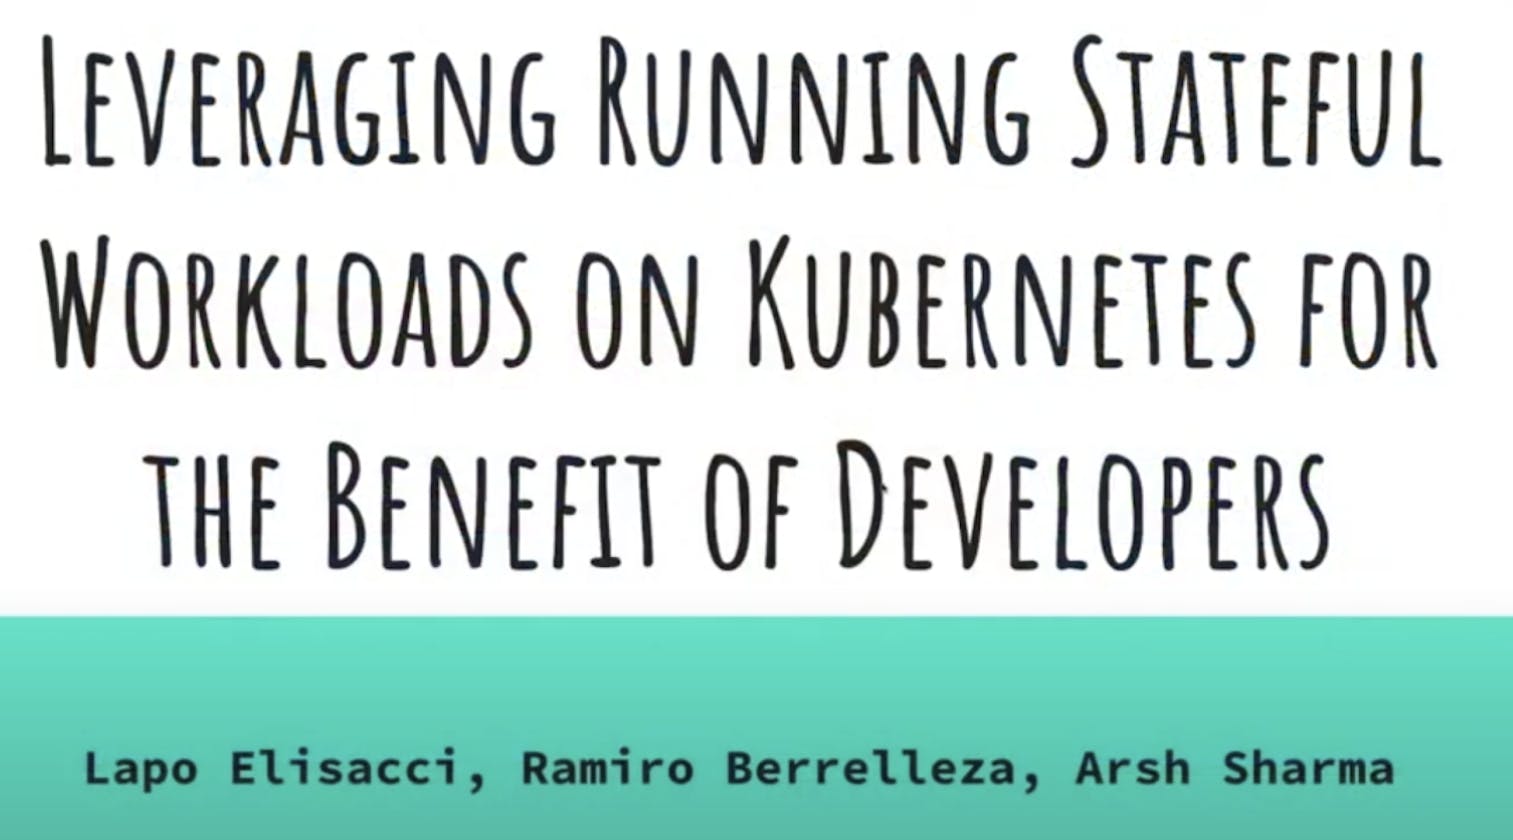 Leveraging Running Stateful Workloads on Kubernetes for the Benefit of Developers